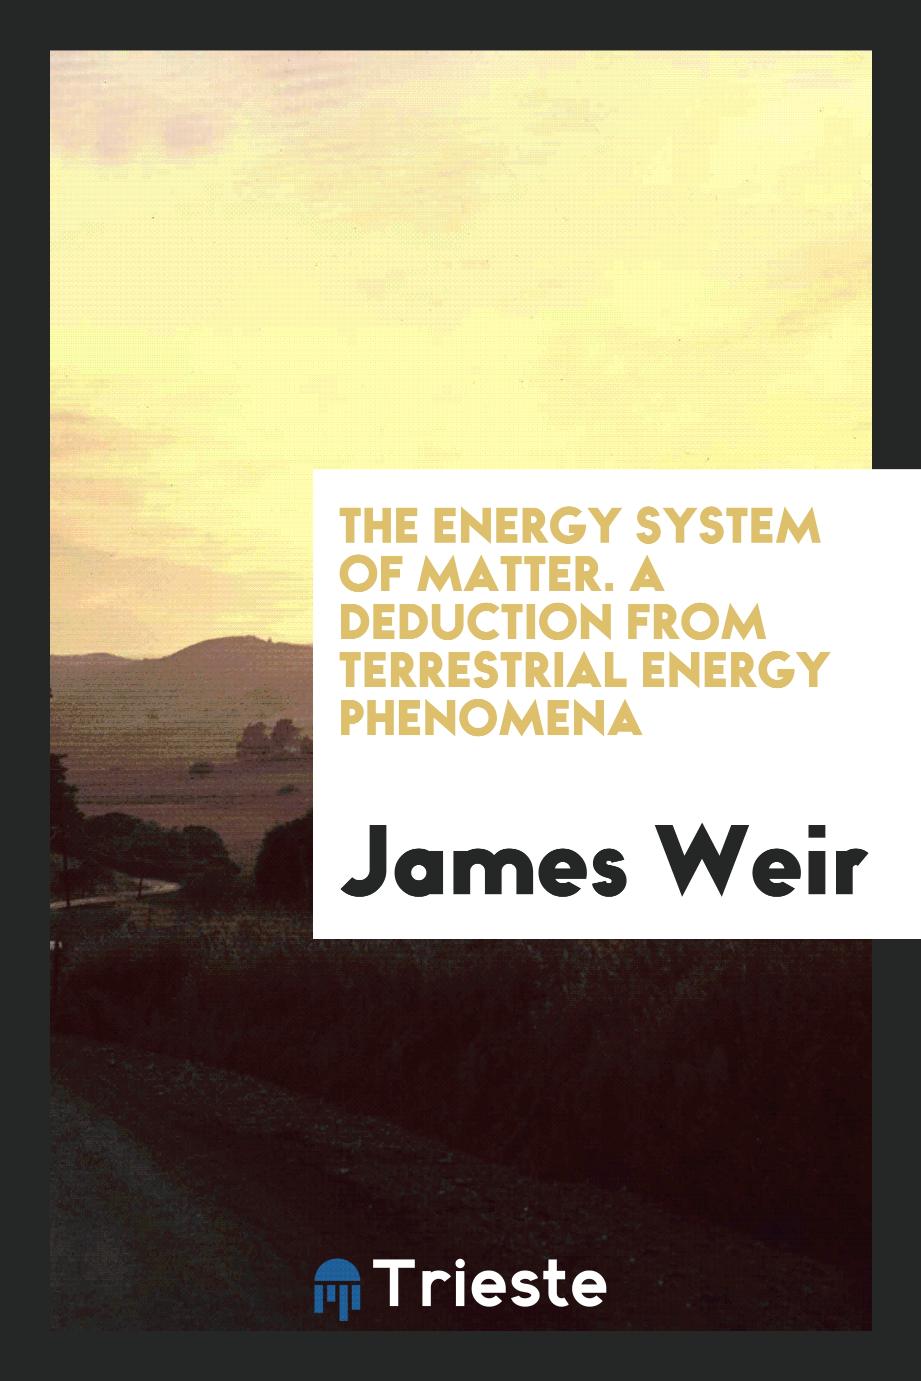 The Energy System of Matter. A Deduction from Terrestrial Energy Phenomena